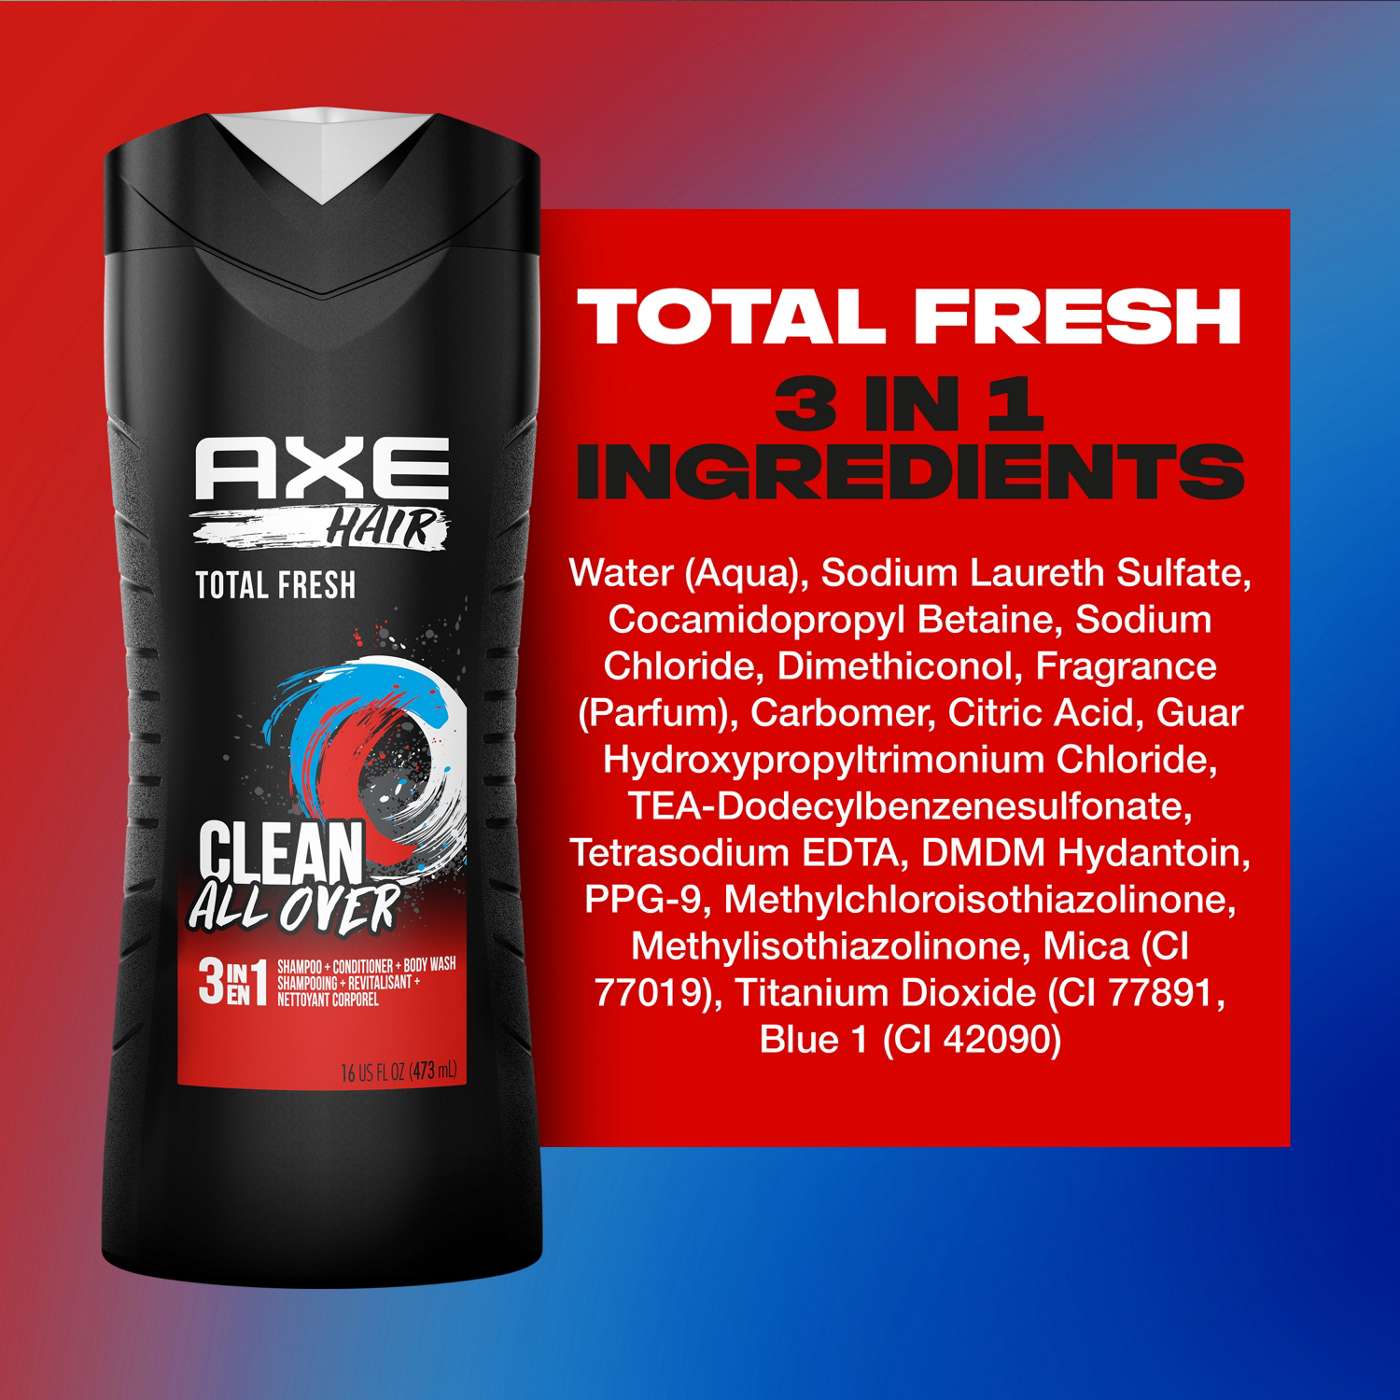 AXE 3 in 1 Body Wash + Shampoo + Conditioner - Total Fresh; image 9 of 9